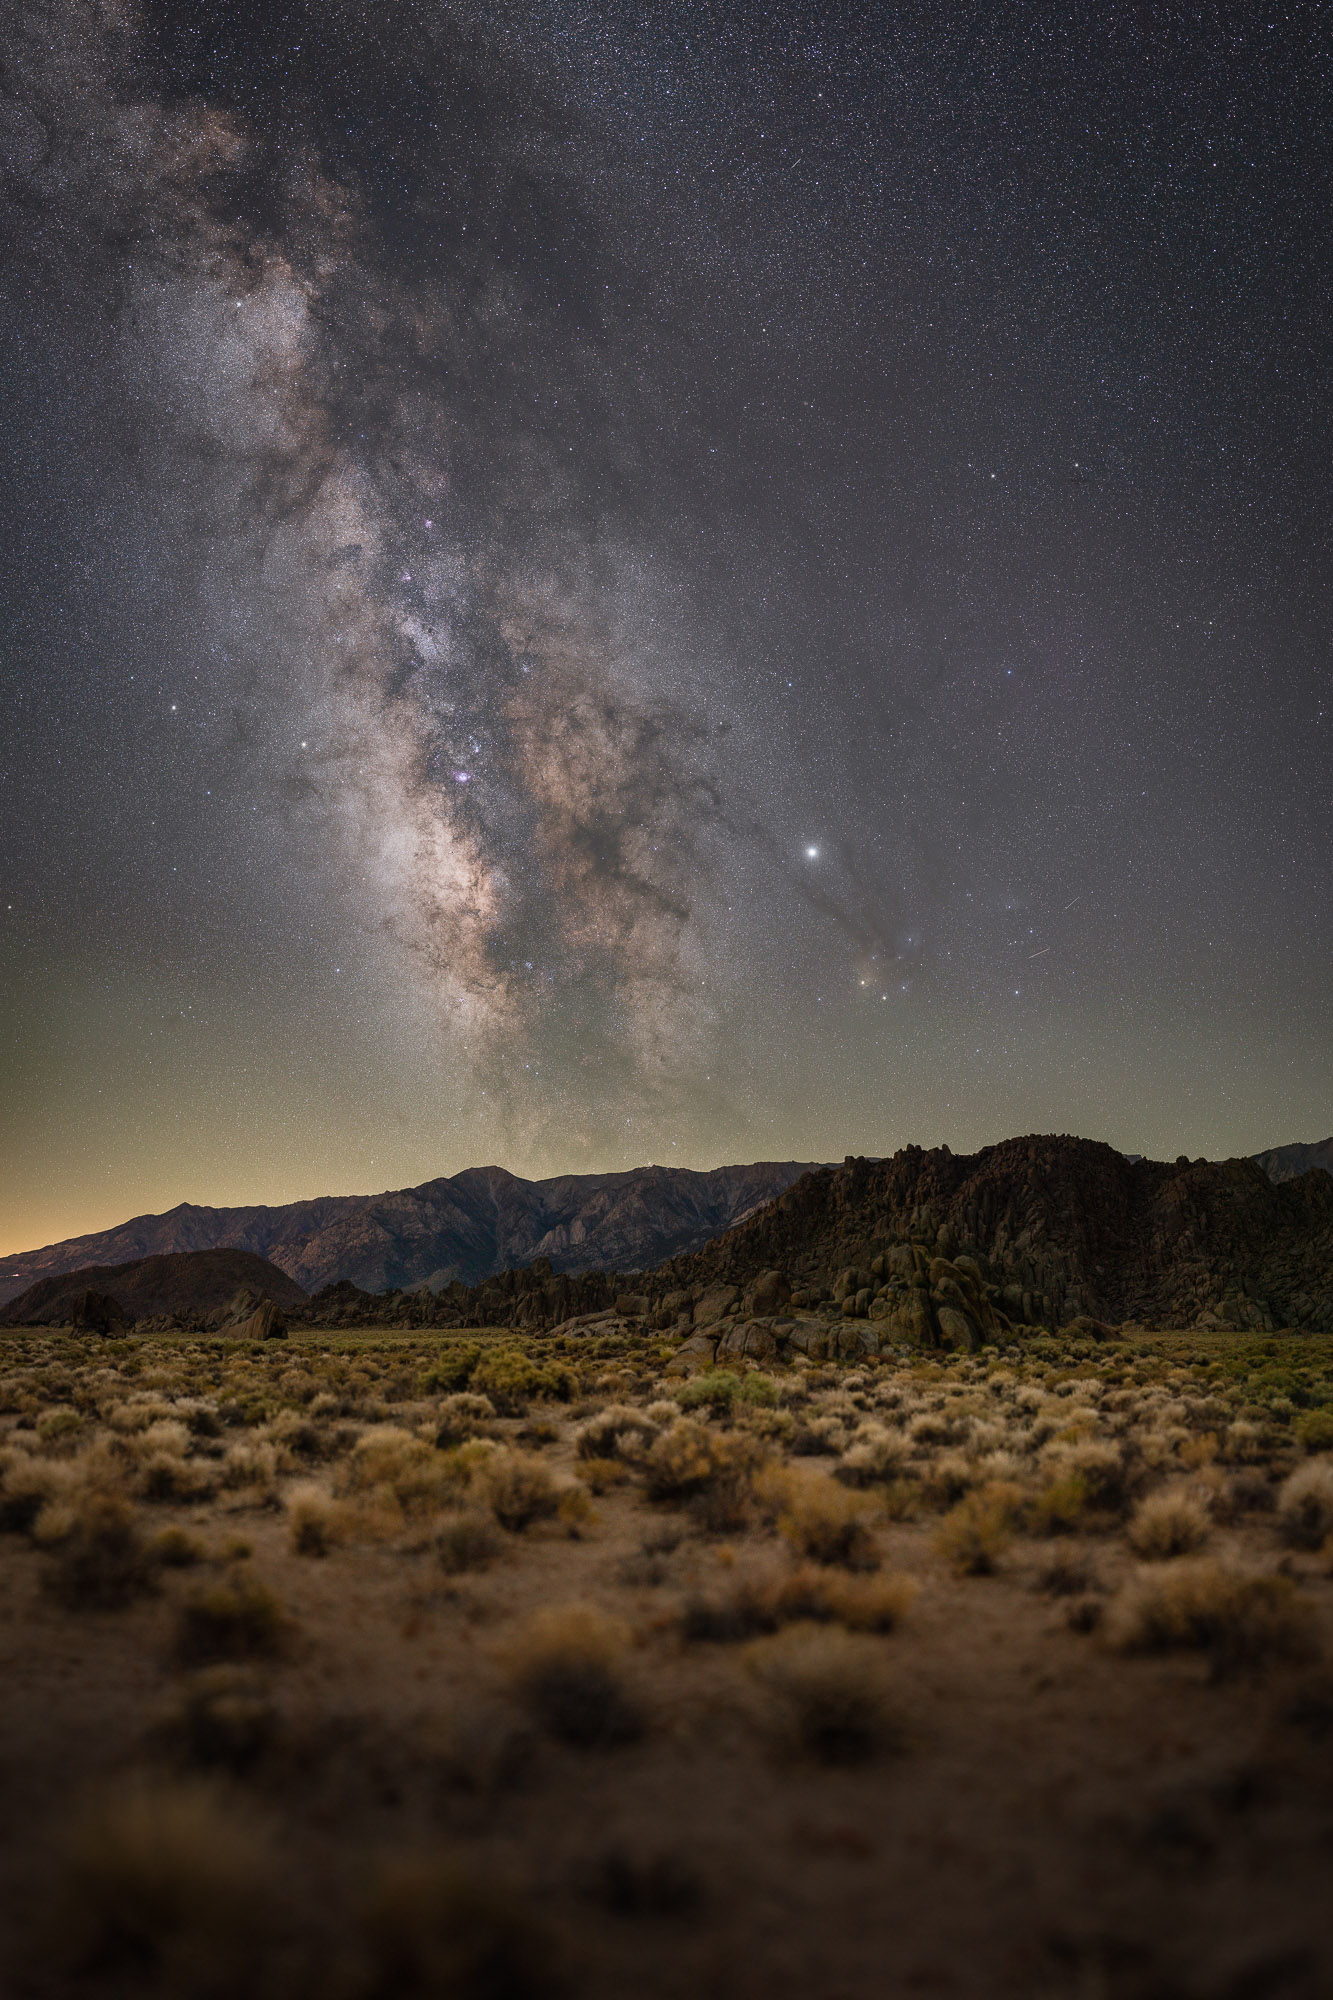 Alabama Hills and the Milky Way shot on the Sigma 105mm f/1.4 DG HSM Art Lens